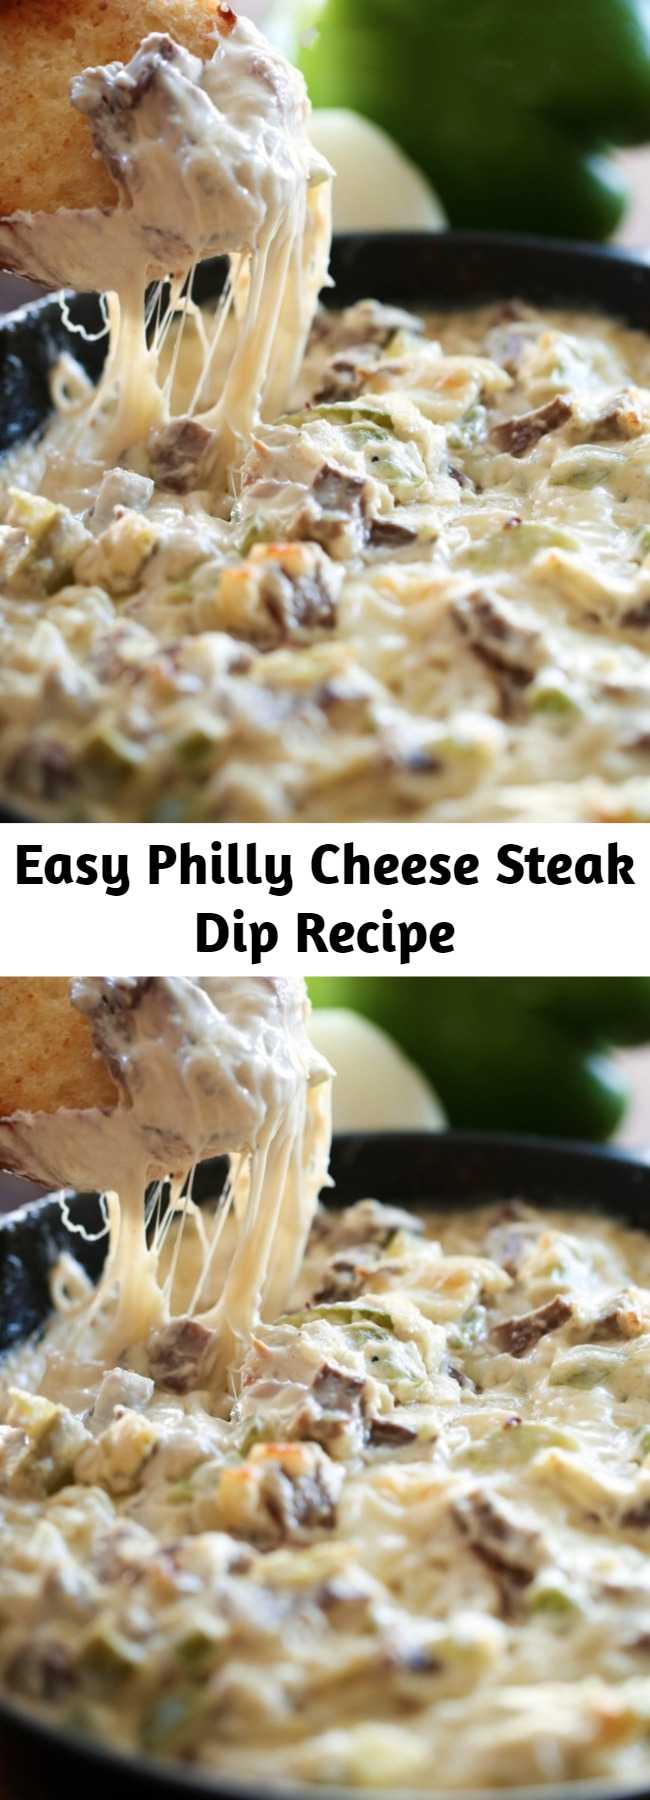 Easy Philly Cheese Steak Dip Recipe - This Philly Cheese Steak Dip is phenomenal and truly tastes JUST like you are biting into that beloved and well sought-after sandwich. The flavor is incredible and this recipe is super unique and exciting!